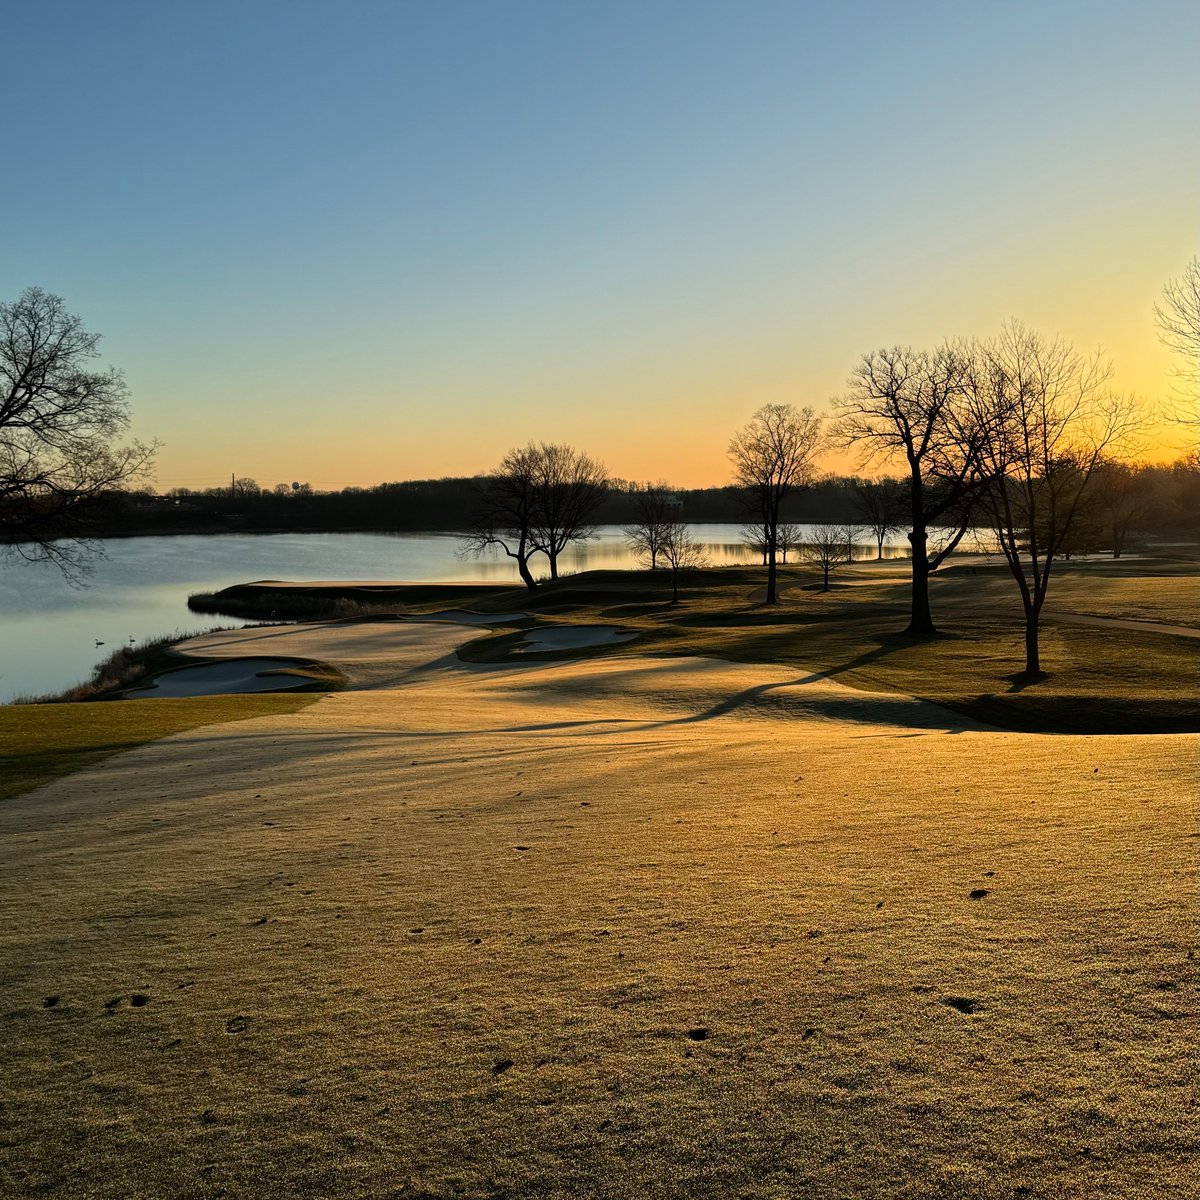 Glad to have mornings like this back. Golf course looks great. We are excited to see members back on the course this weekend. @Hazeltine